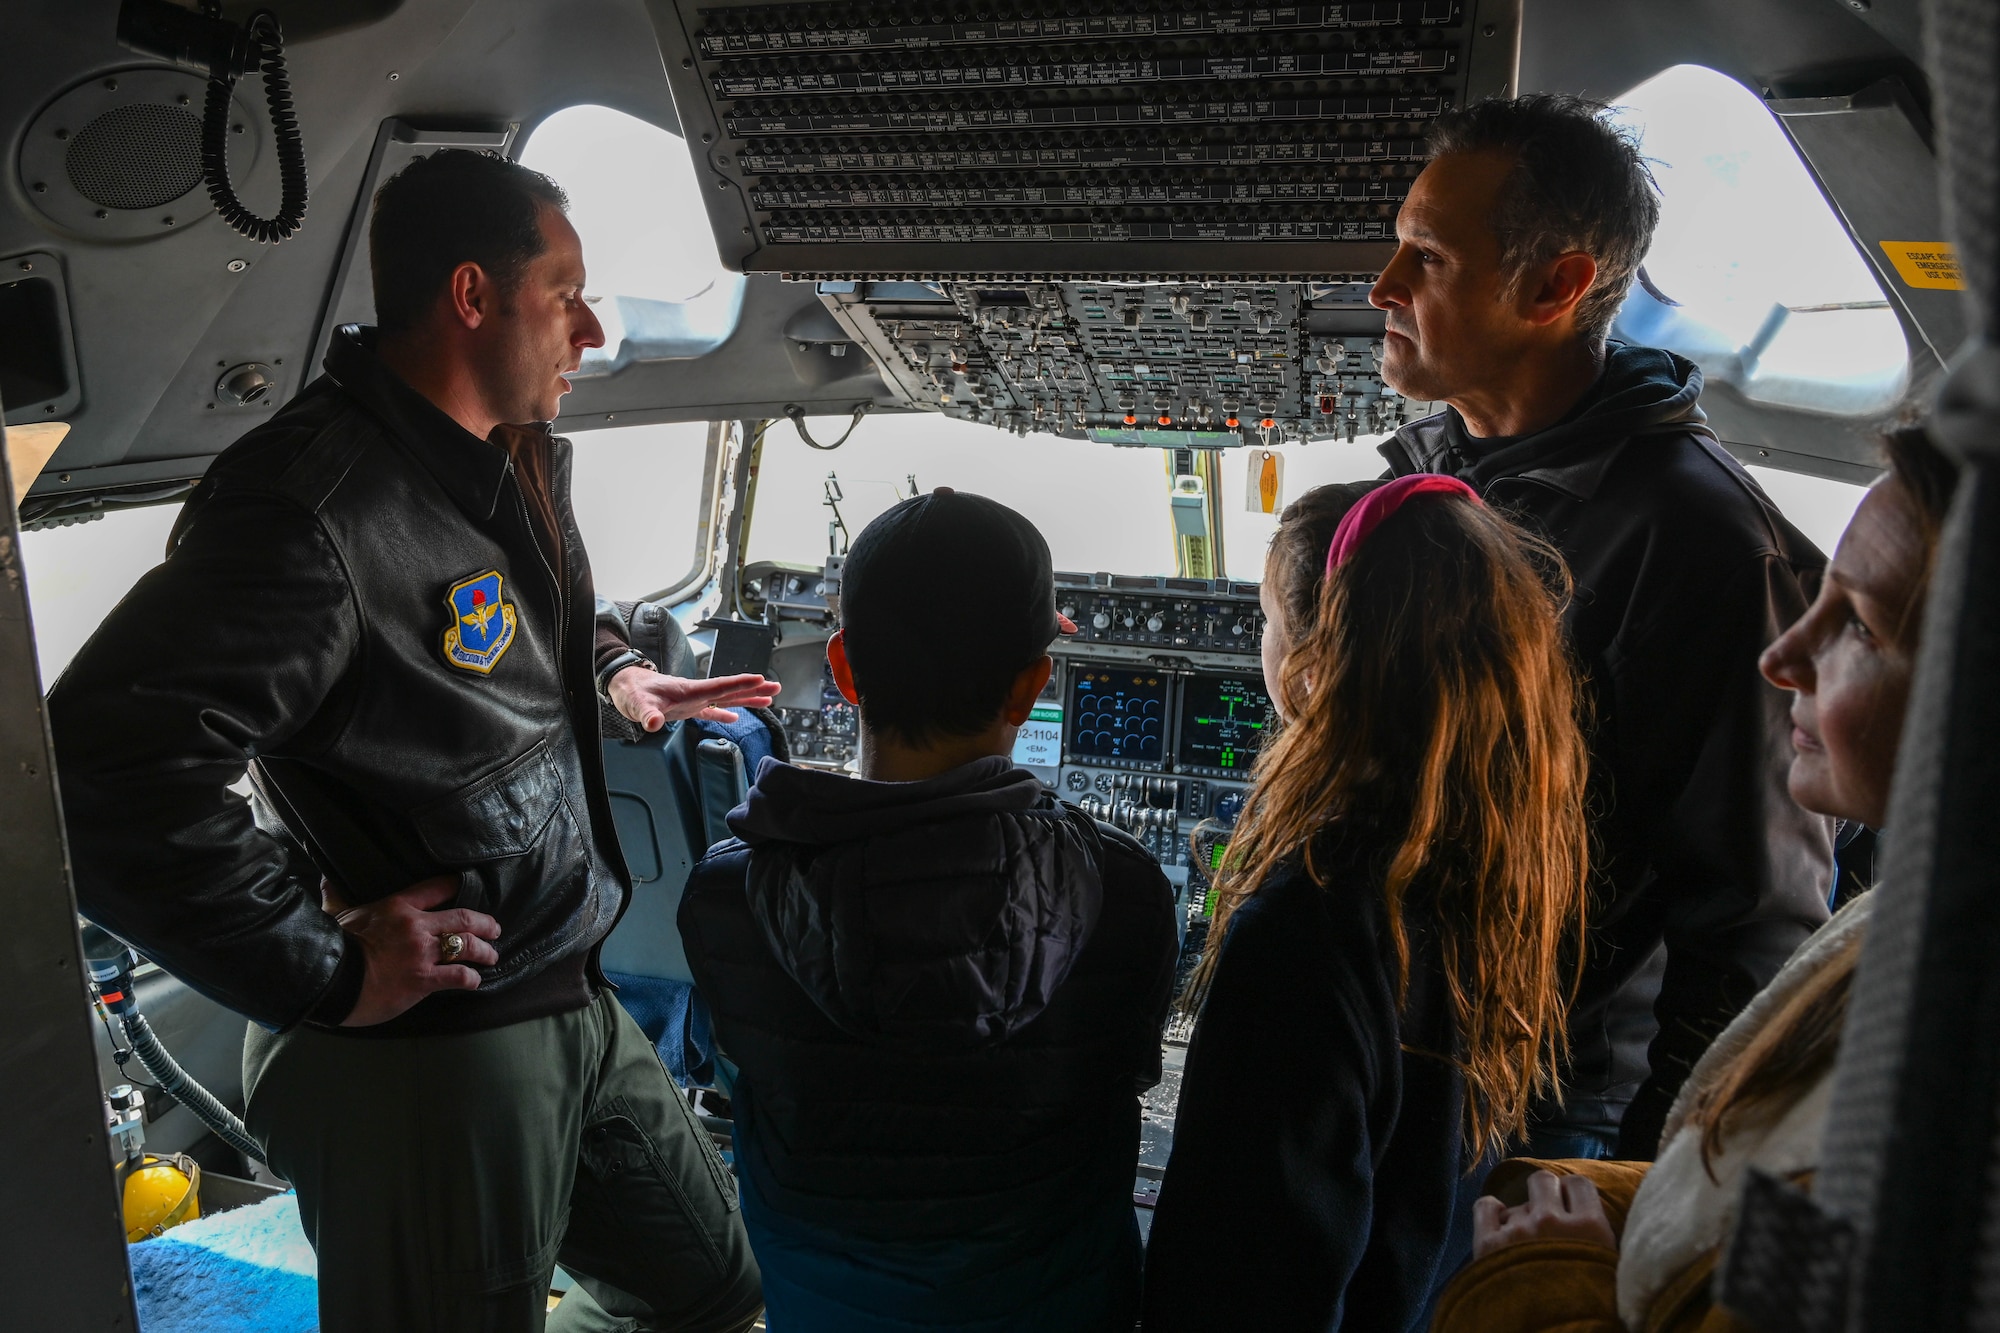 U.S. Air Force Lt. Col. John Shaw, 58th Airlift Squadron director of operations, talks about elements in the cockpit in a C-17 Globemaster III at Altus Air Force Base, Oklahoma, March 14, 2023. During their time on base, the Leadership Oklahoma members had a chance to tour a static C-17 and ask aircrew members questions about the aircraft. (U.S. Air Force photo by Senior Airman Trenton Jancze)